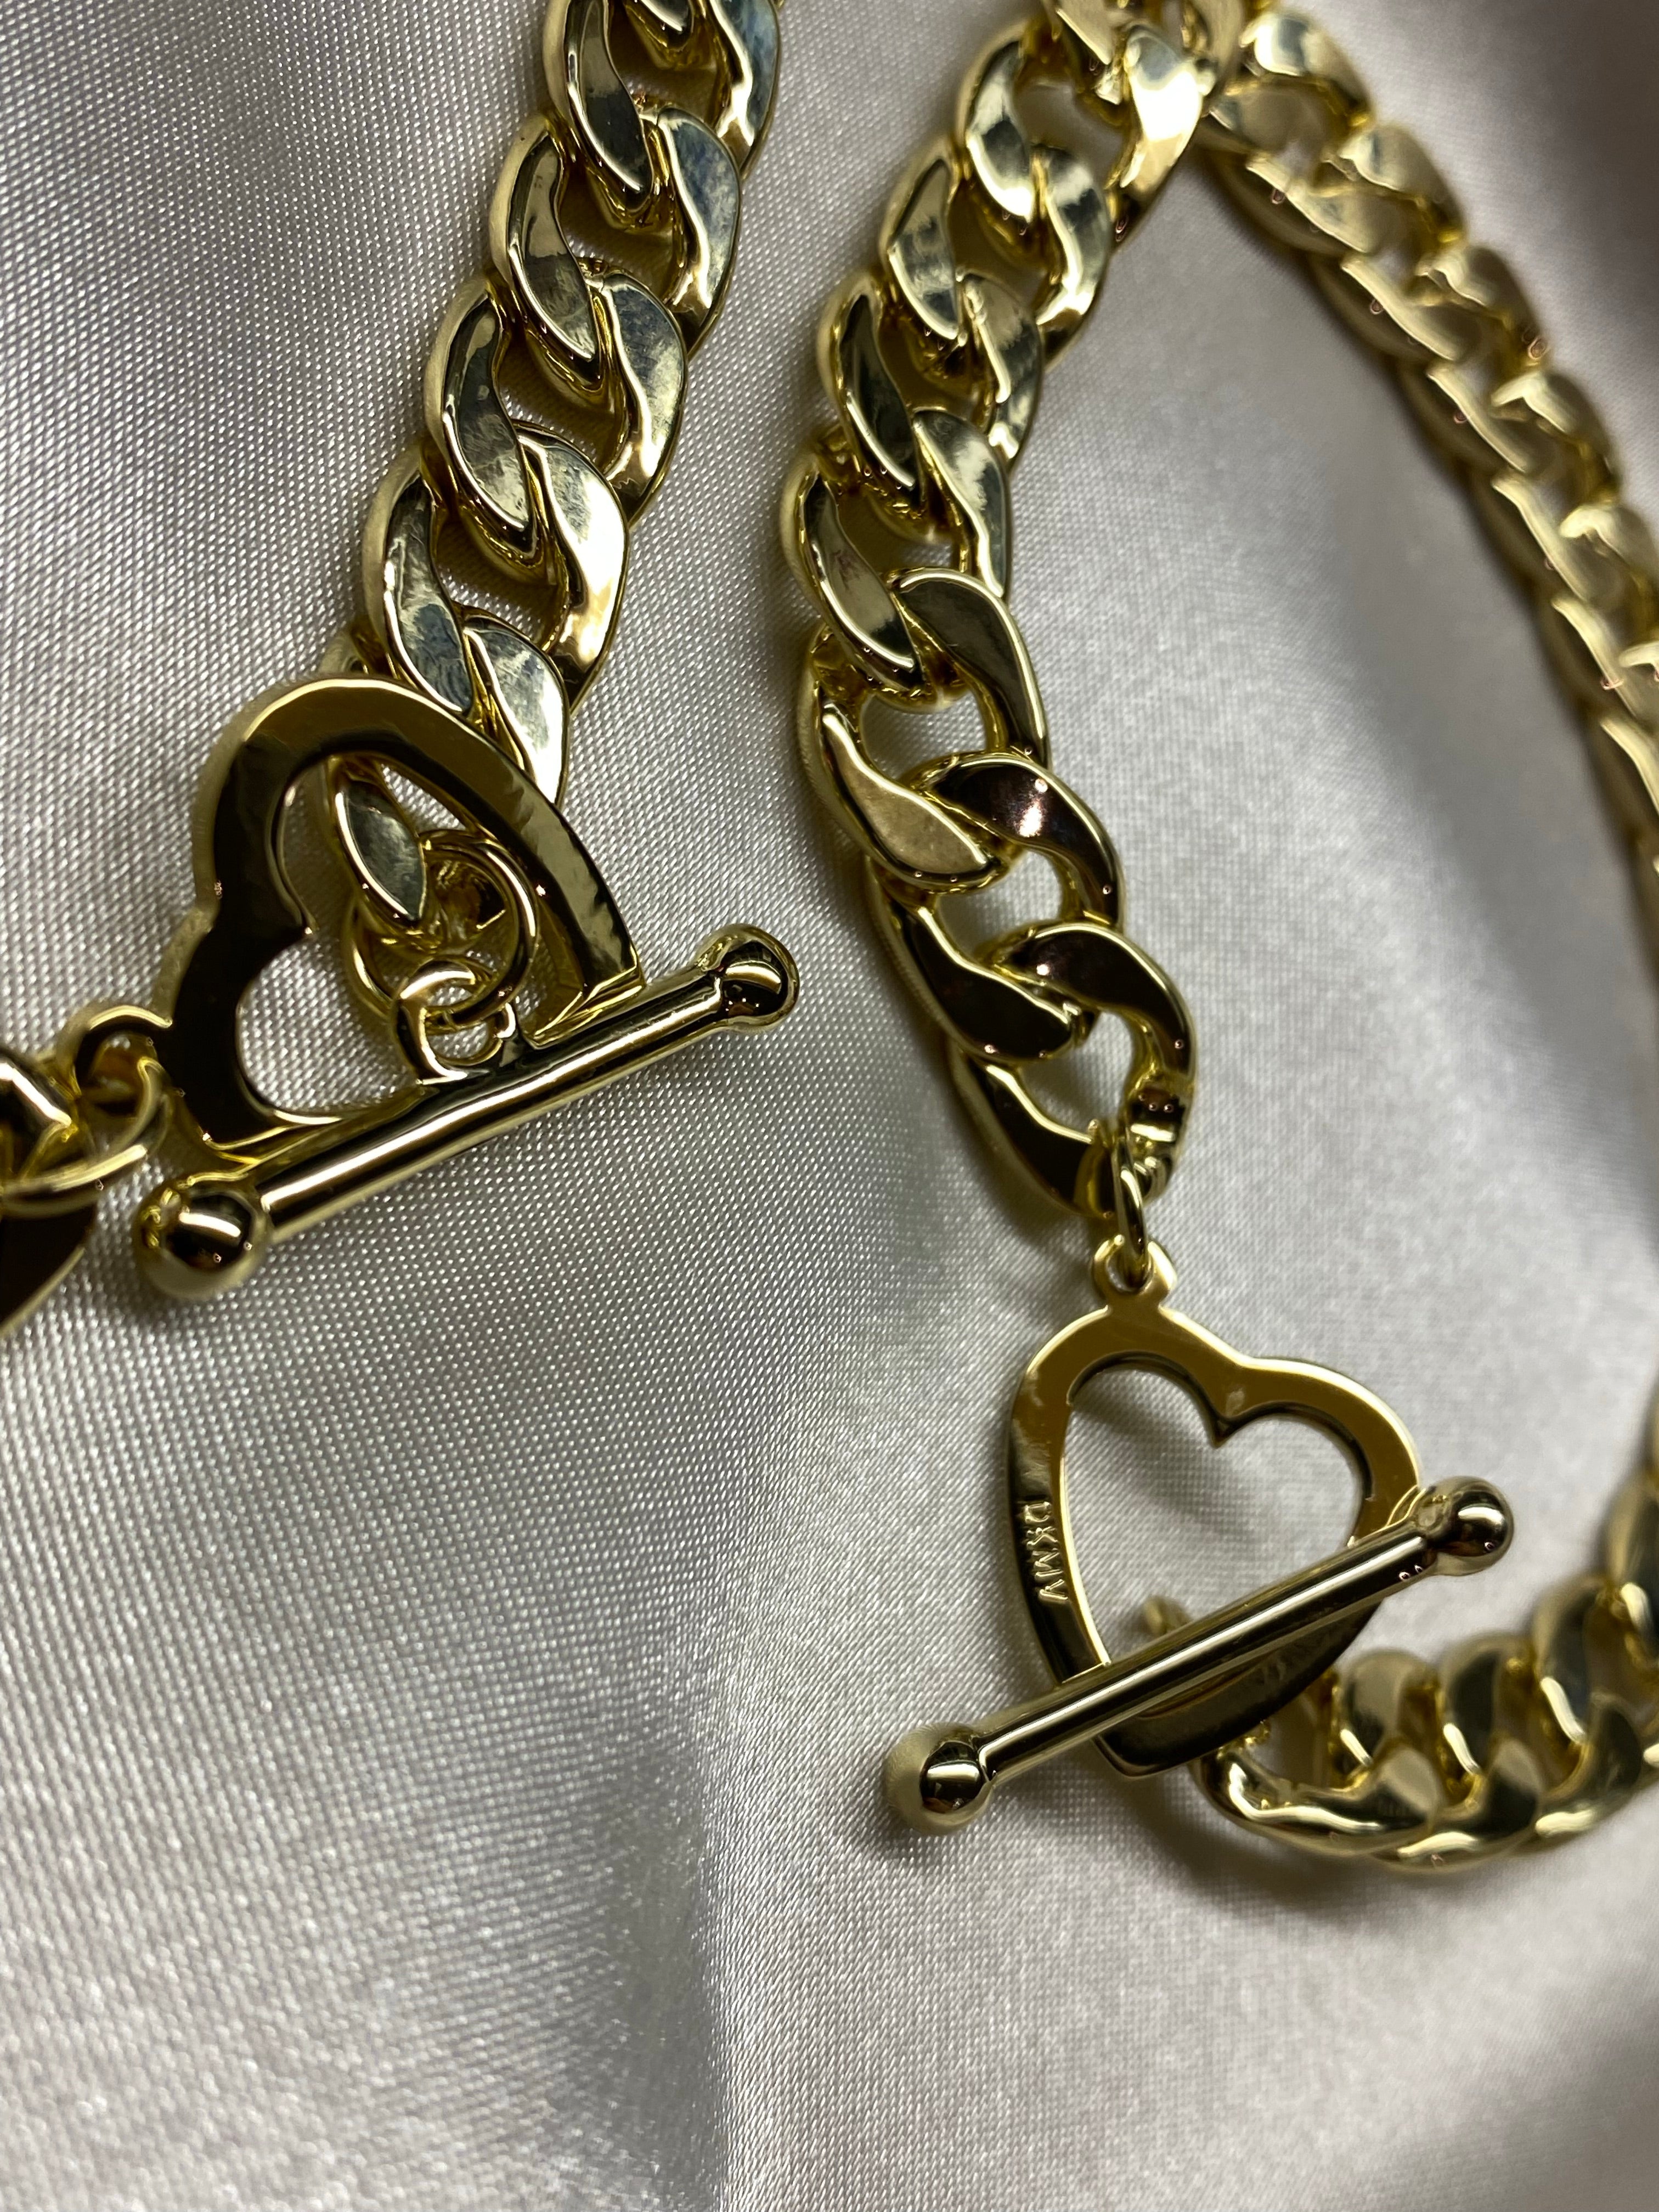 Don’t mess with this heart bracelet